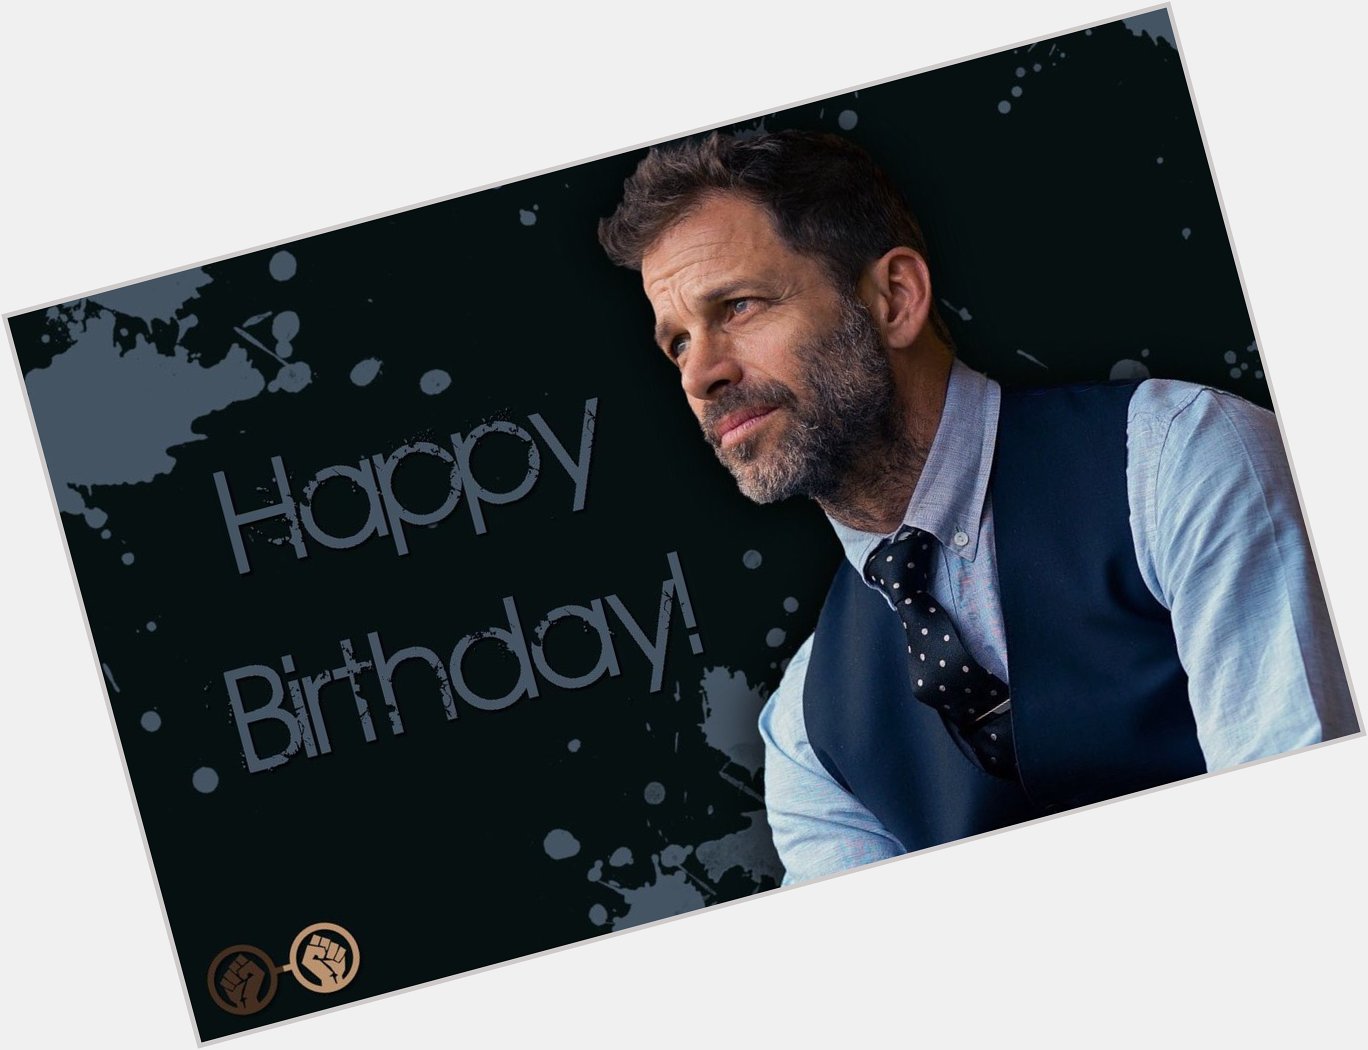 Happy birthday, Zack Snyder! The amazing director, writer and producer turns 52 today! 